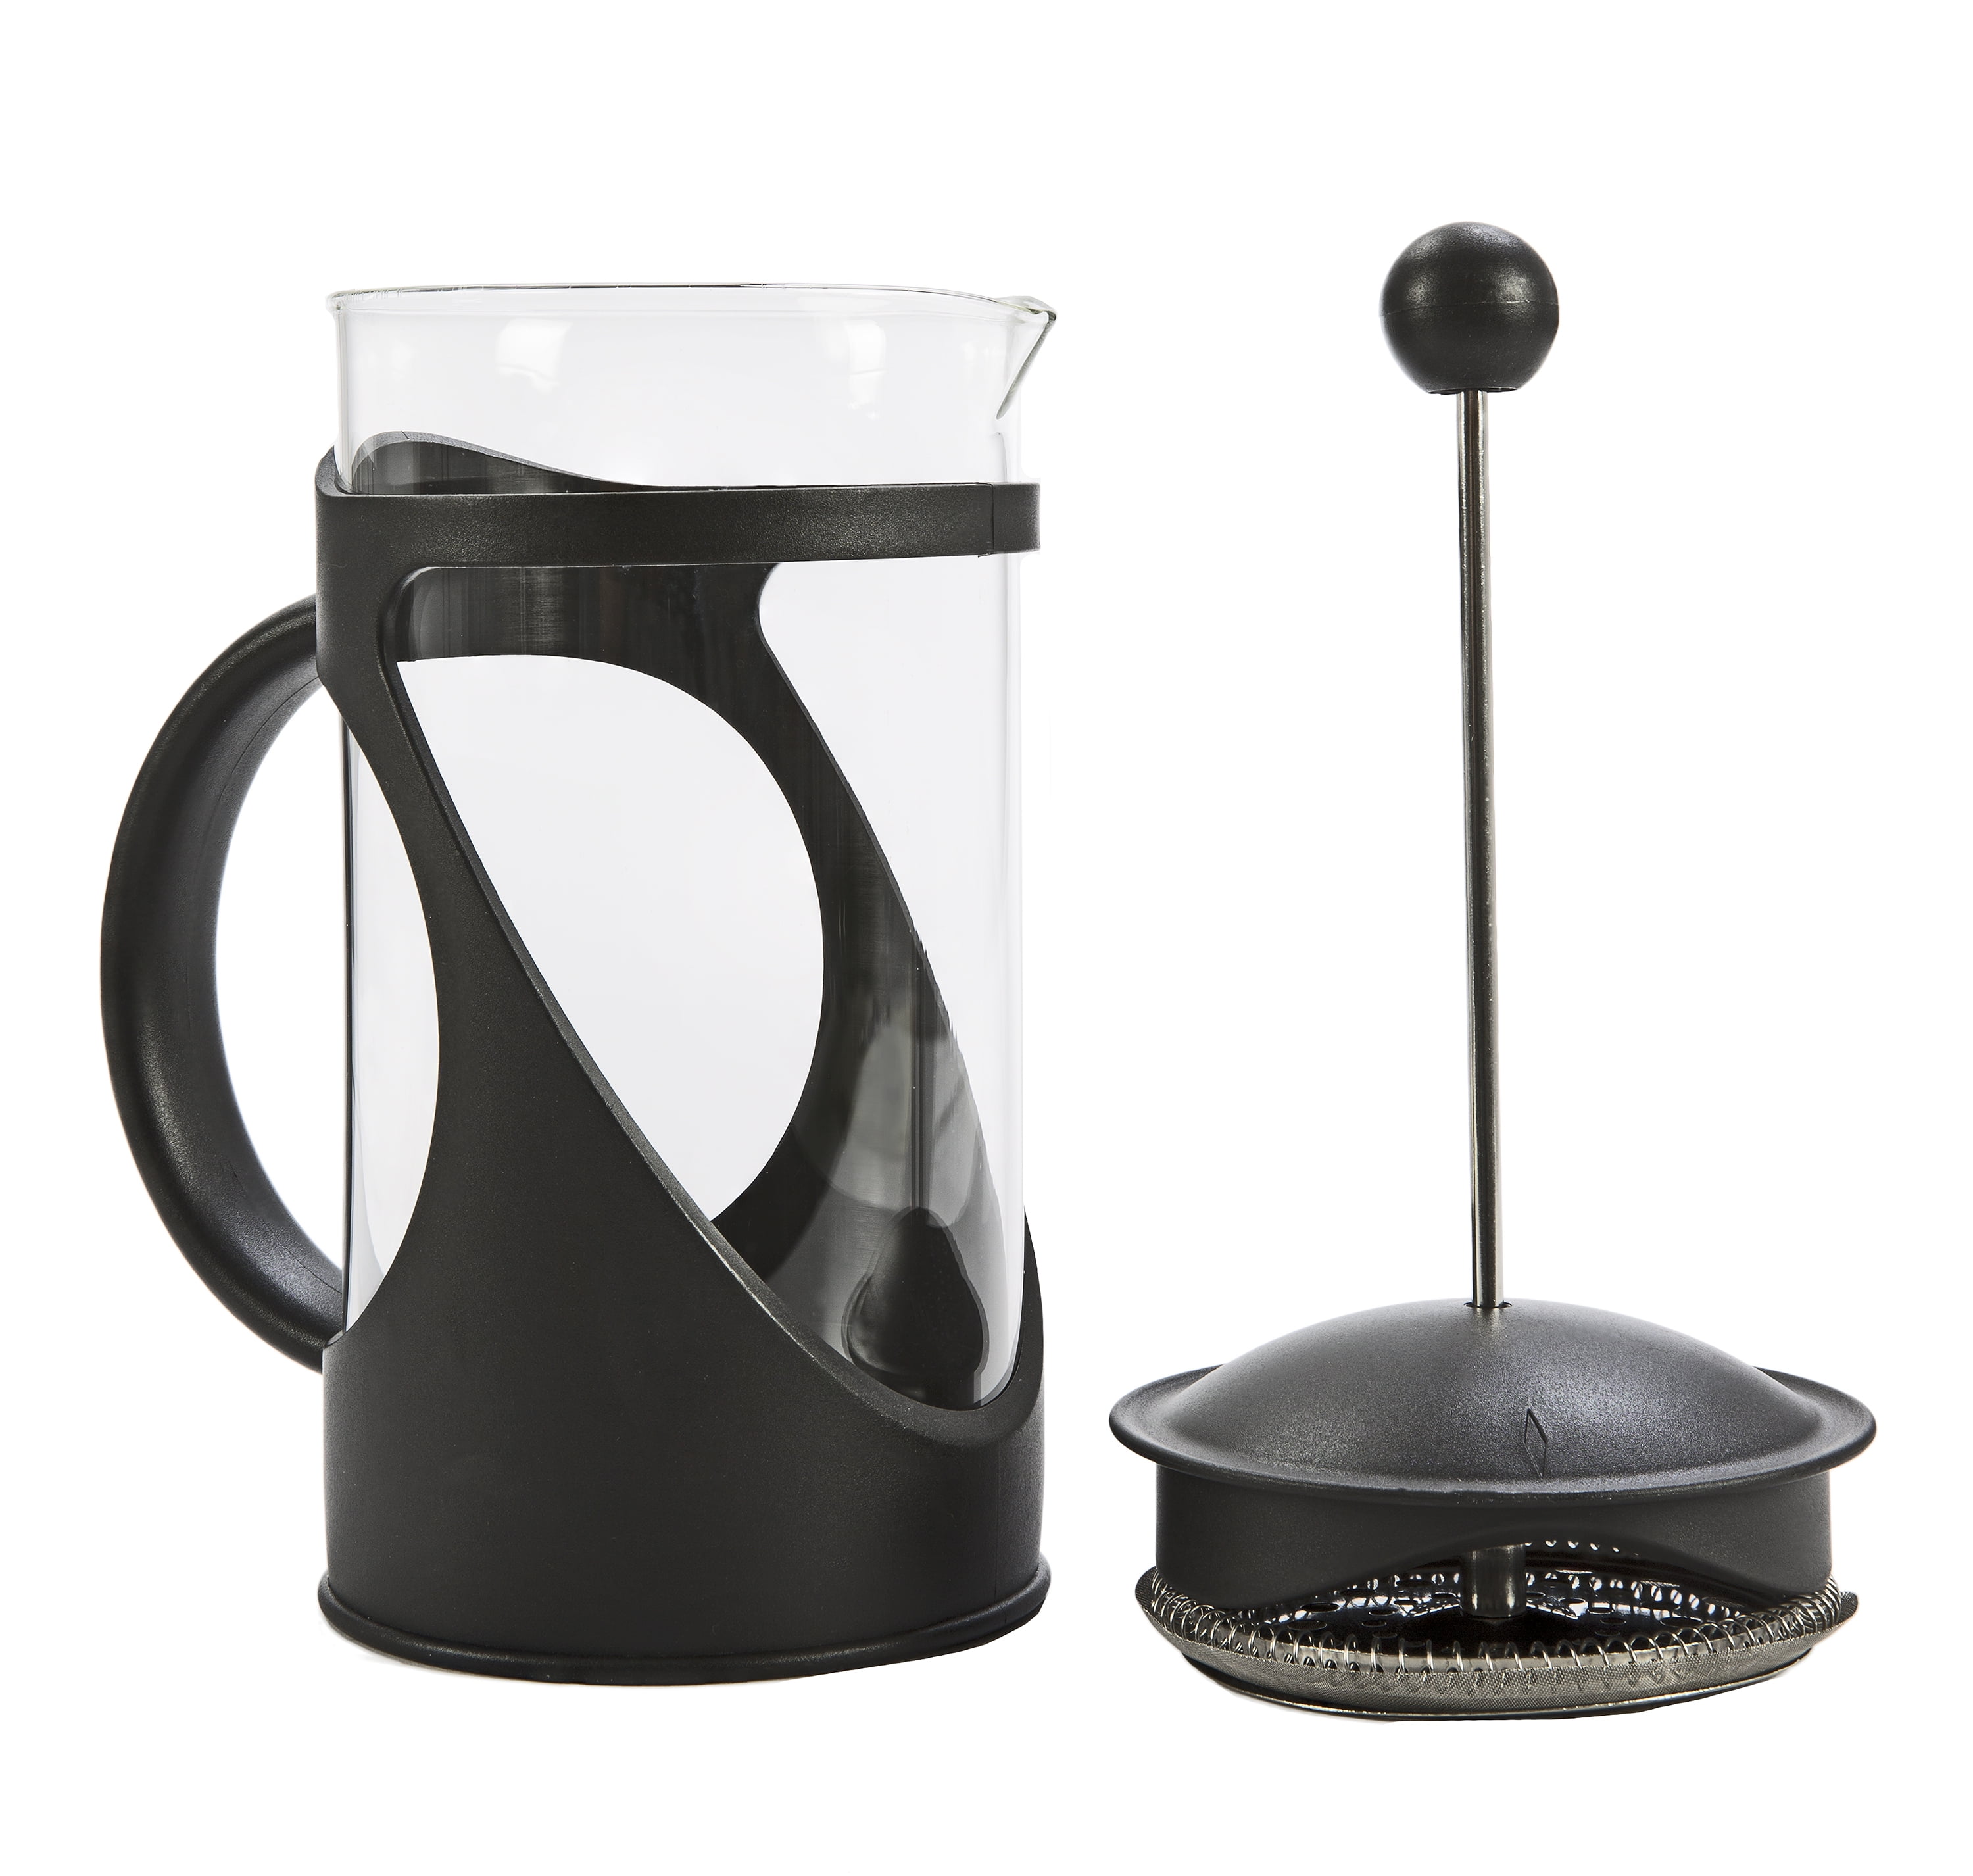 Chef's Choice 695 Electric French Press, Black